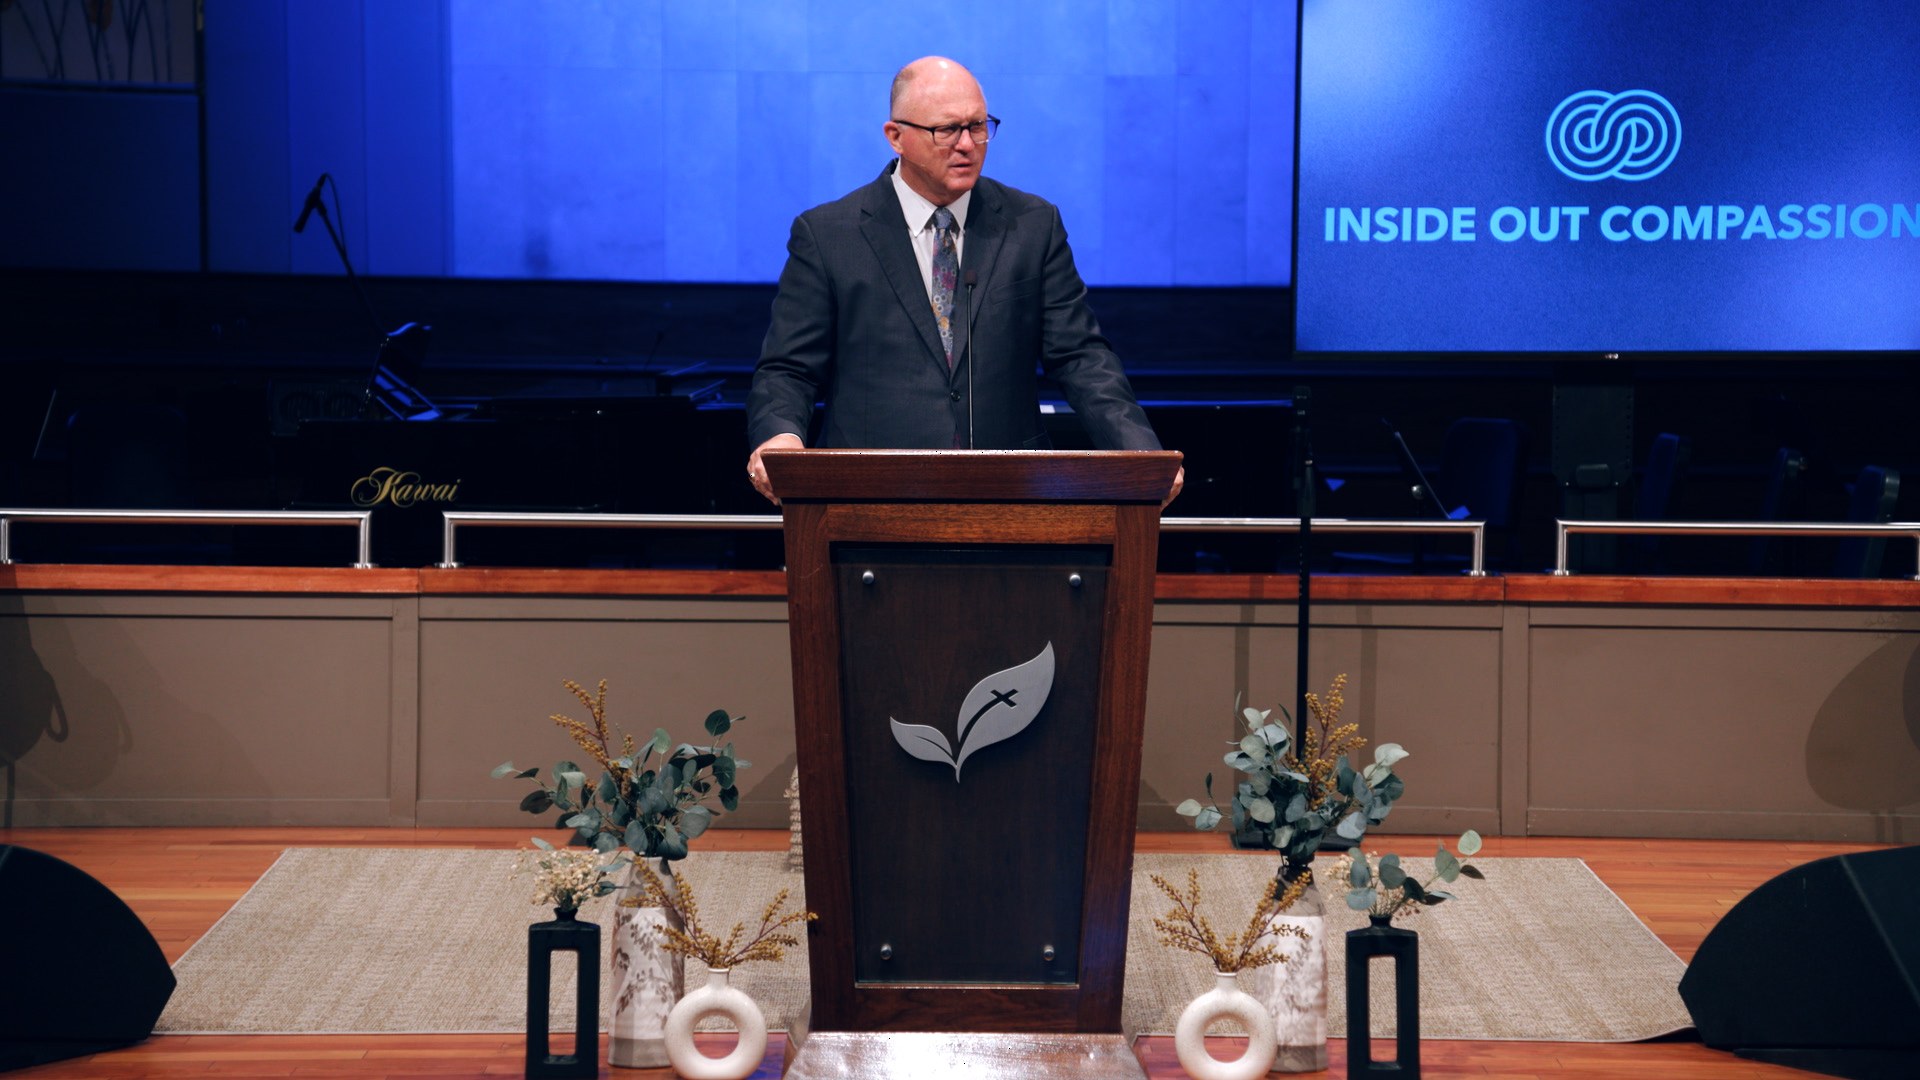 Pastor Paul Chappell: Inside Out Compassion